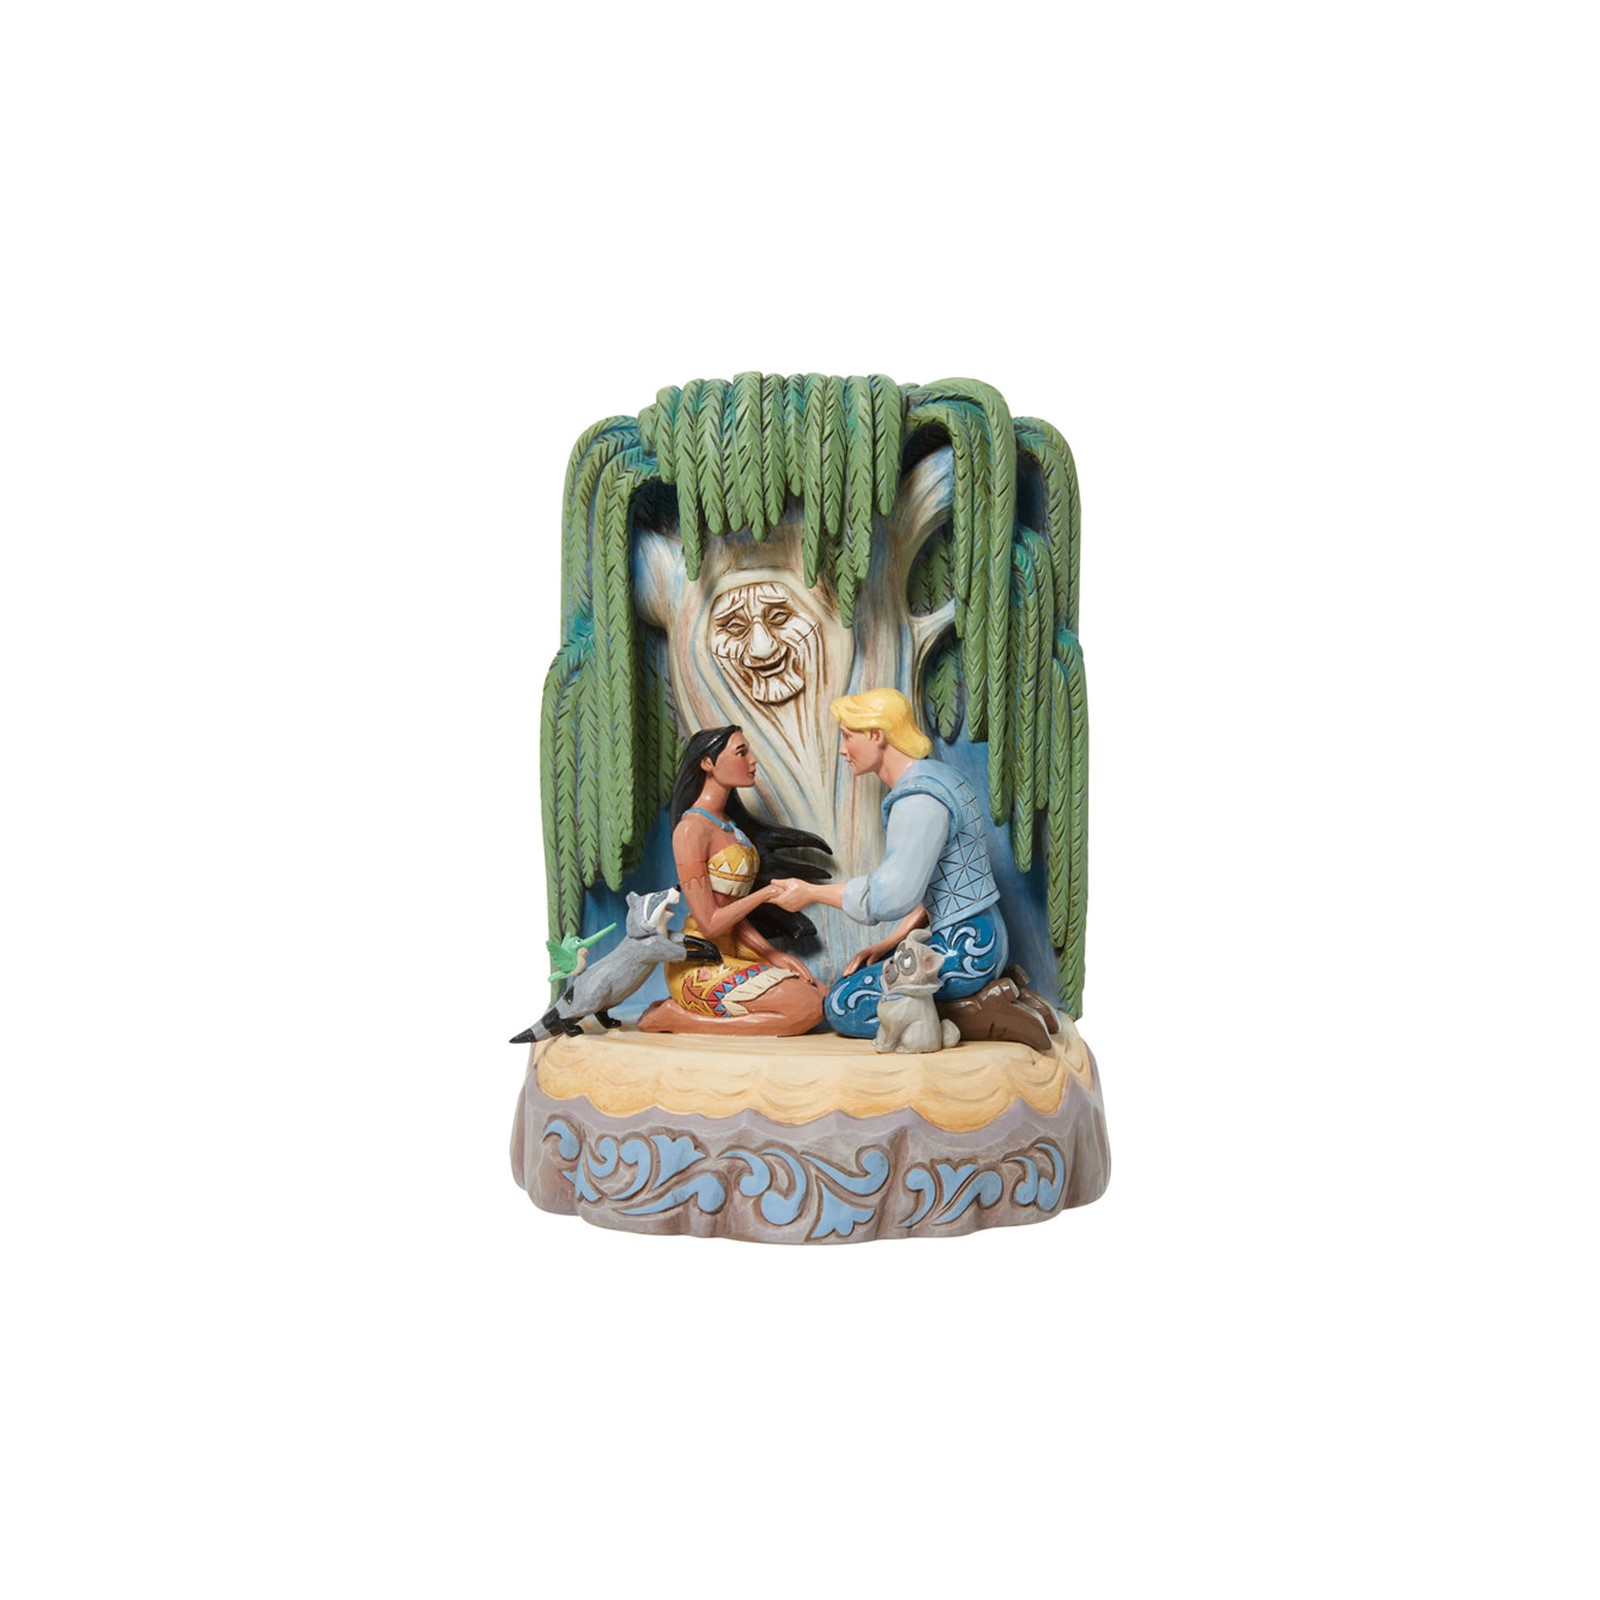 Figurine Disney Pocahontas Carved by Heart Traditions